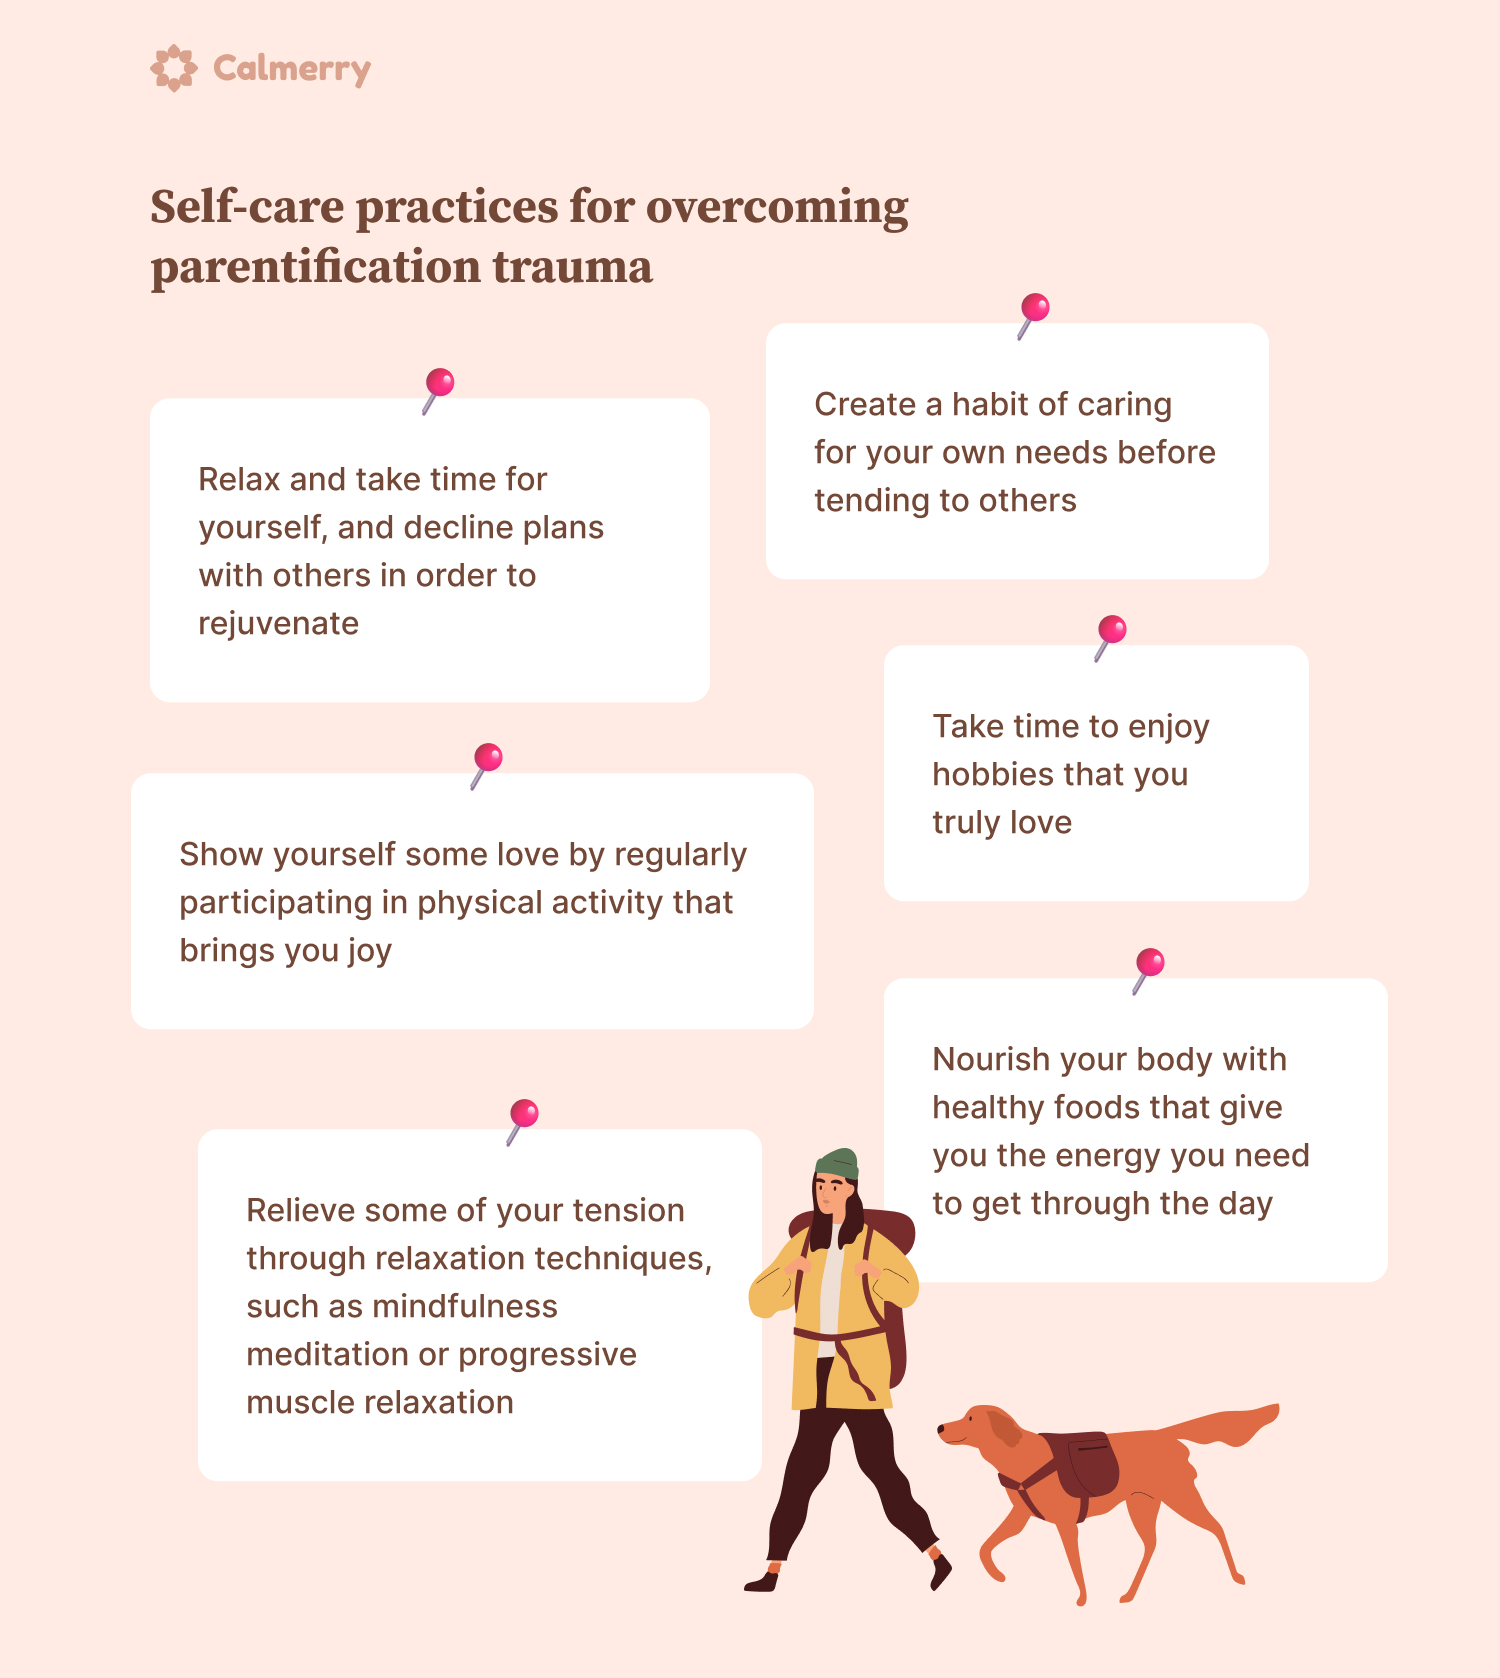 Self-care practices for overcoming parentification trauma